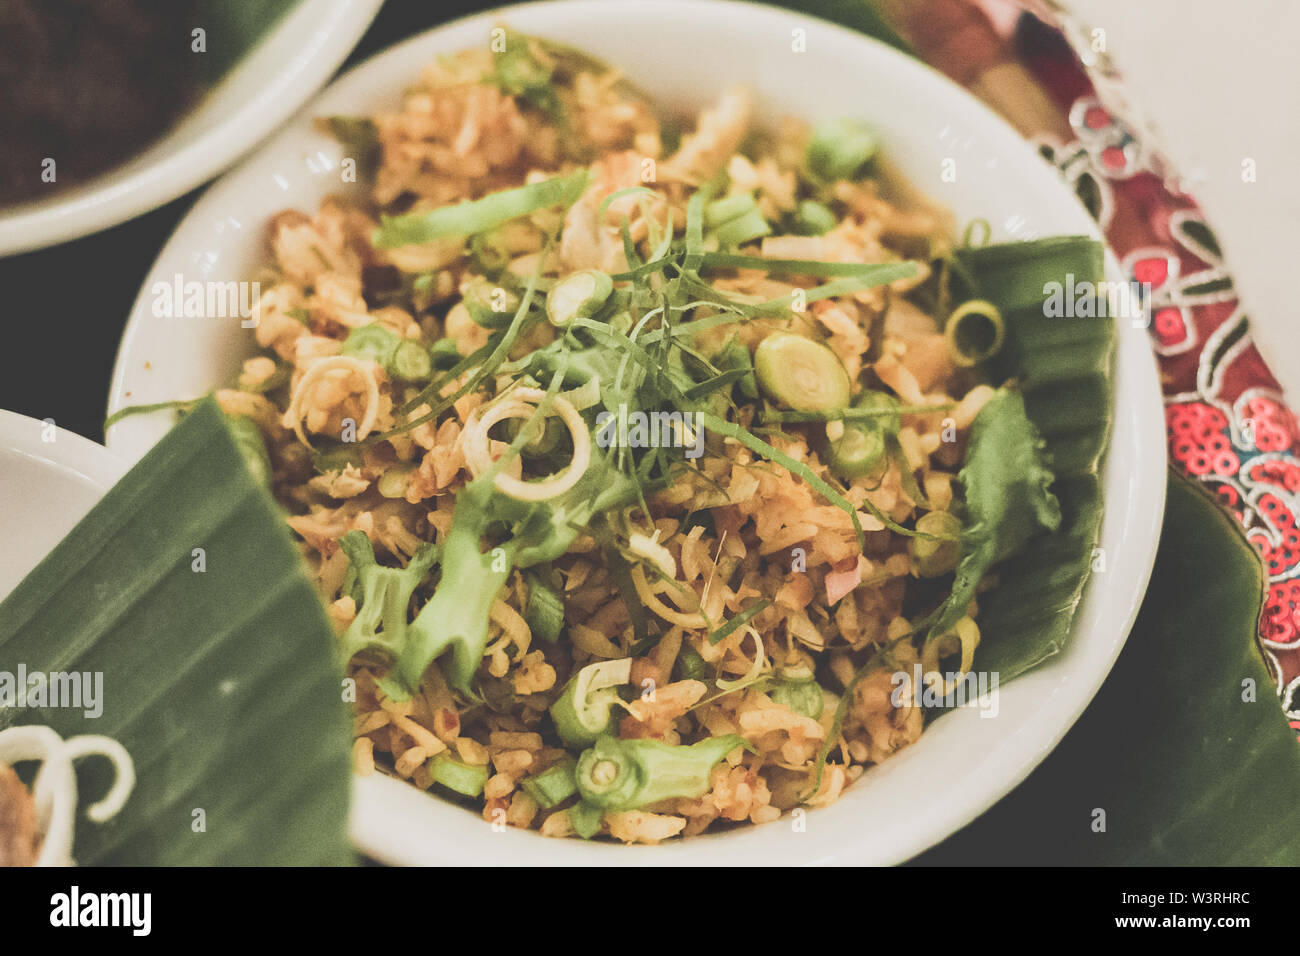 Nasi Ulam Istimewa A spectacular dish of rice with raw herbs, vegetables, minced fish and salted fish Stock Photo